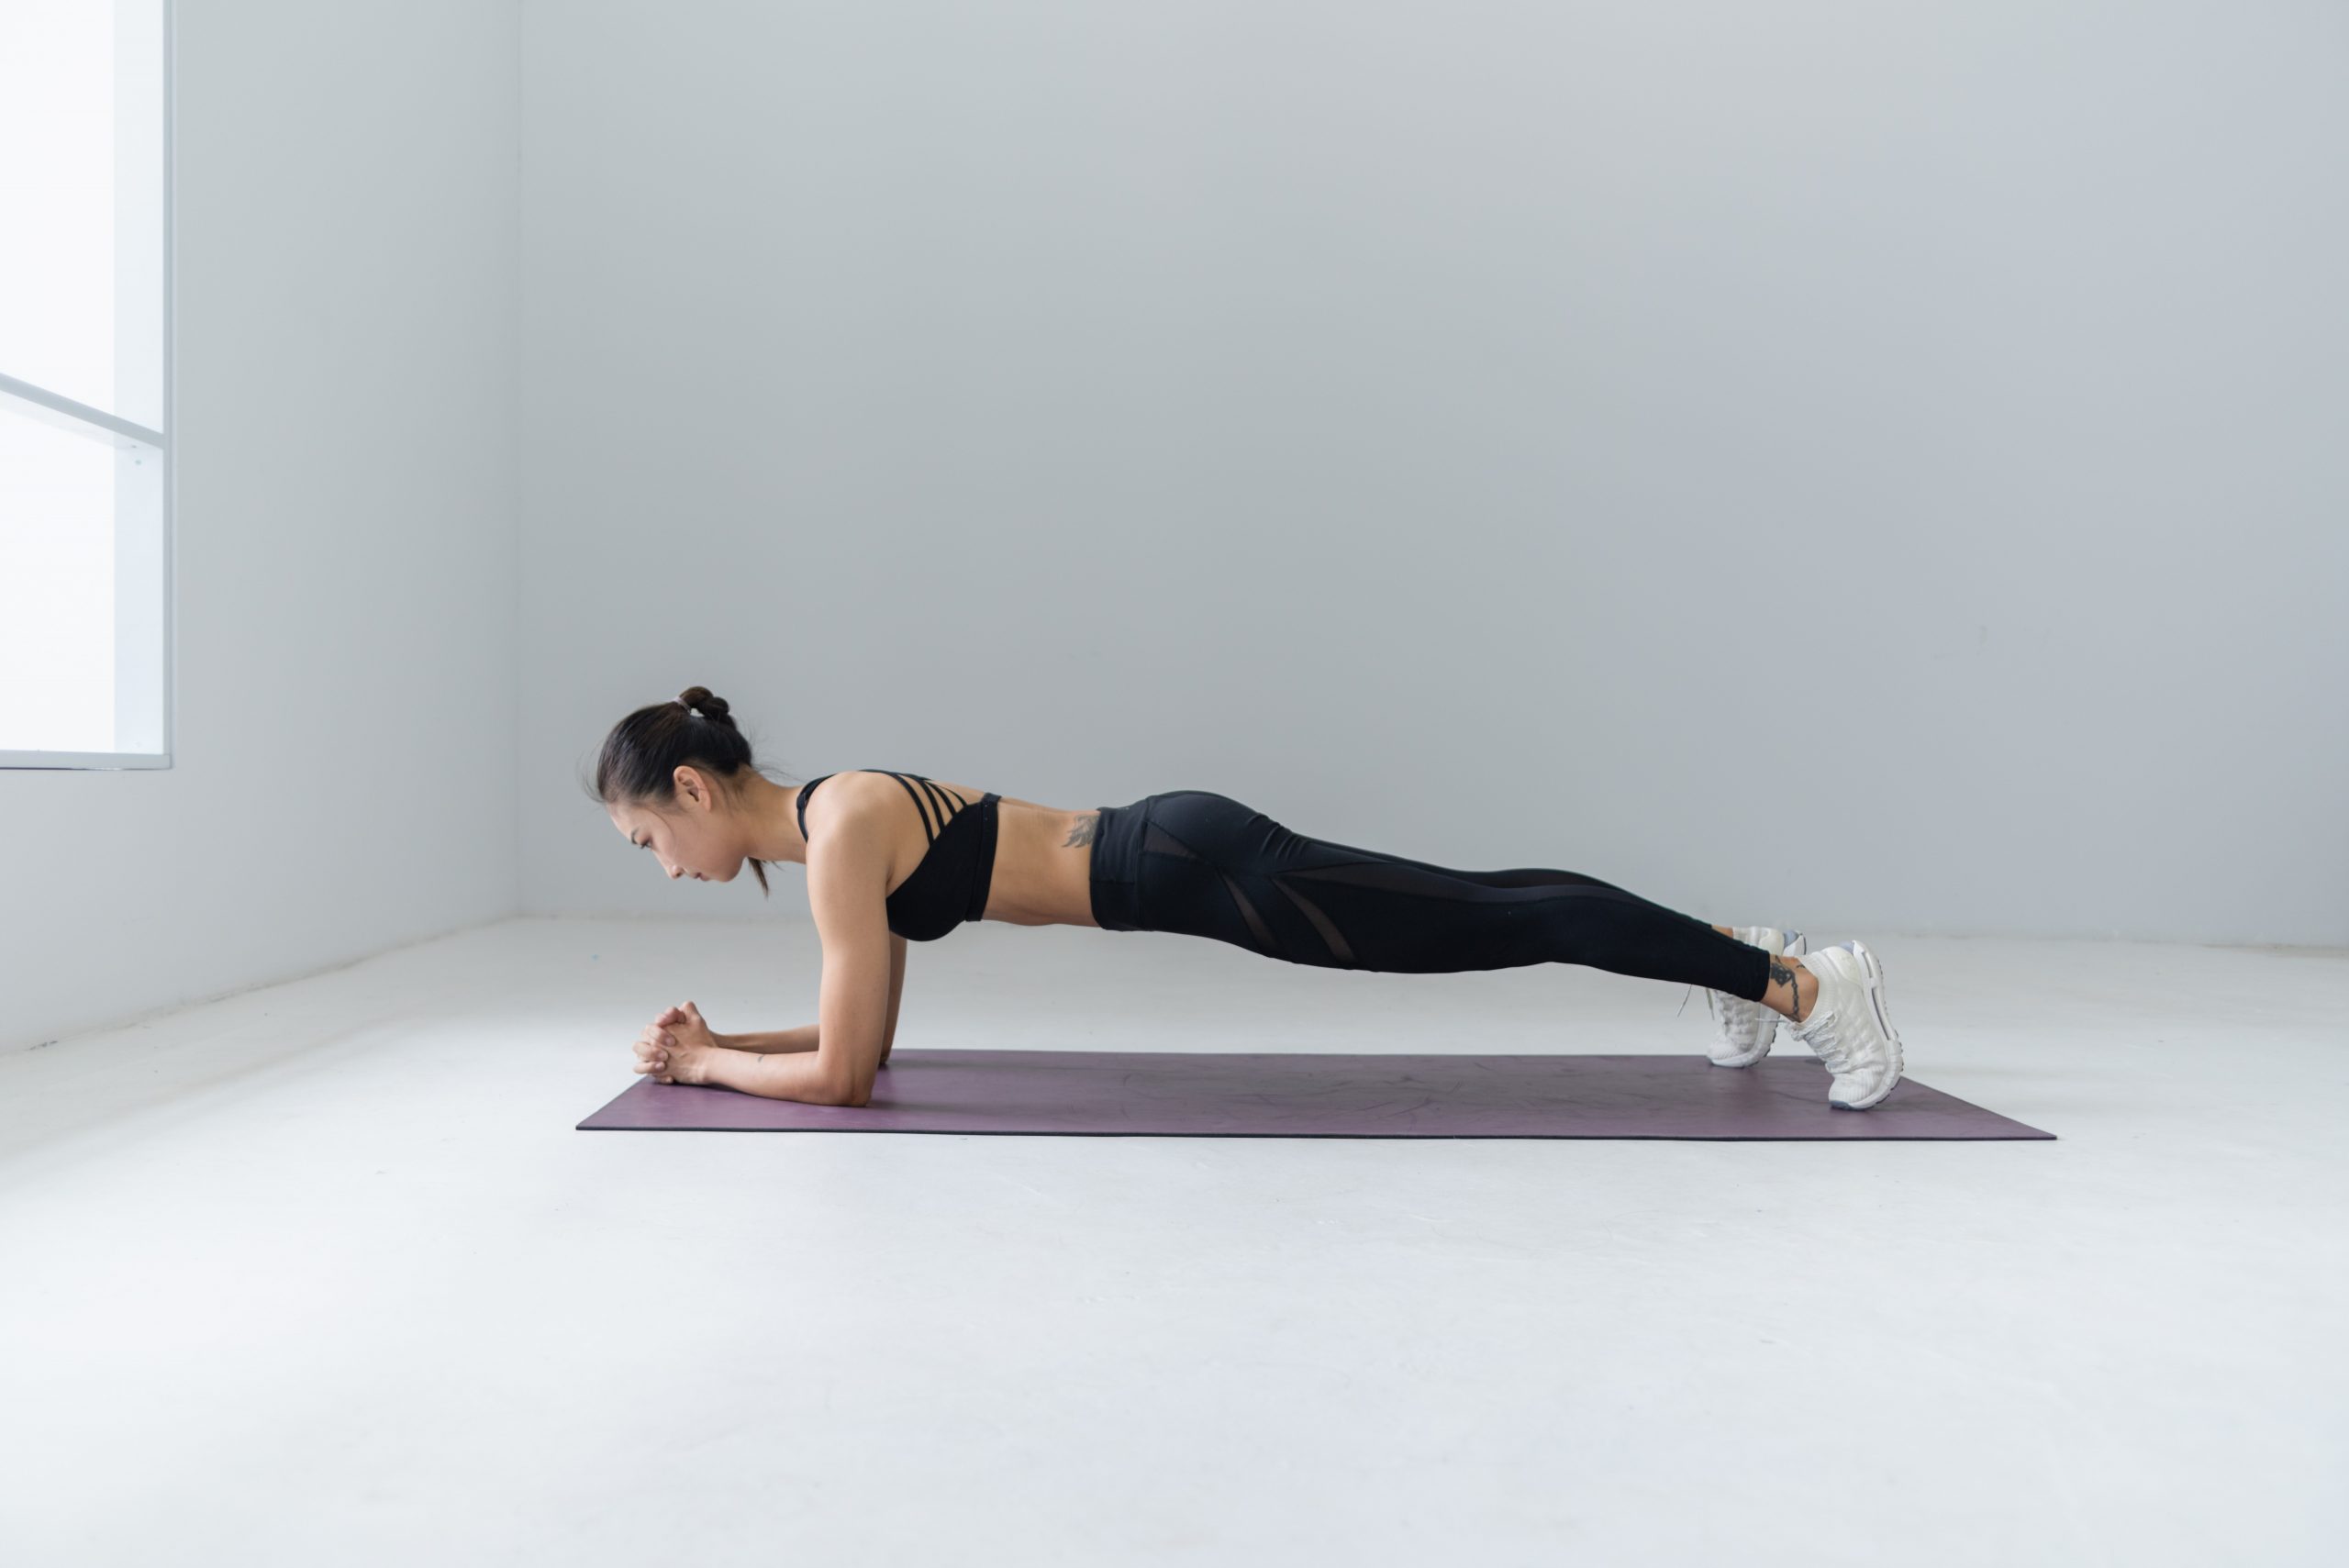 A woman holding forearm plank position